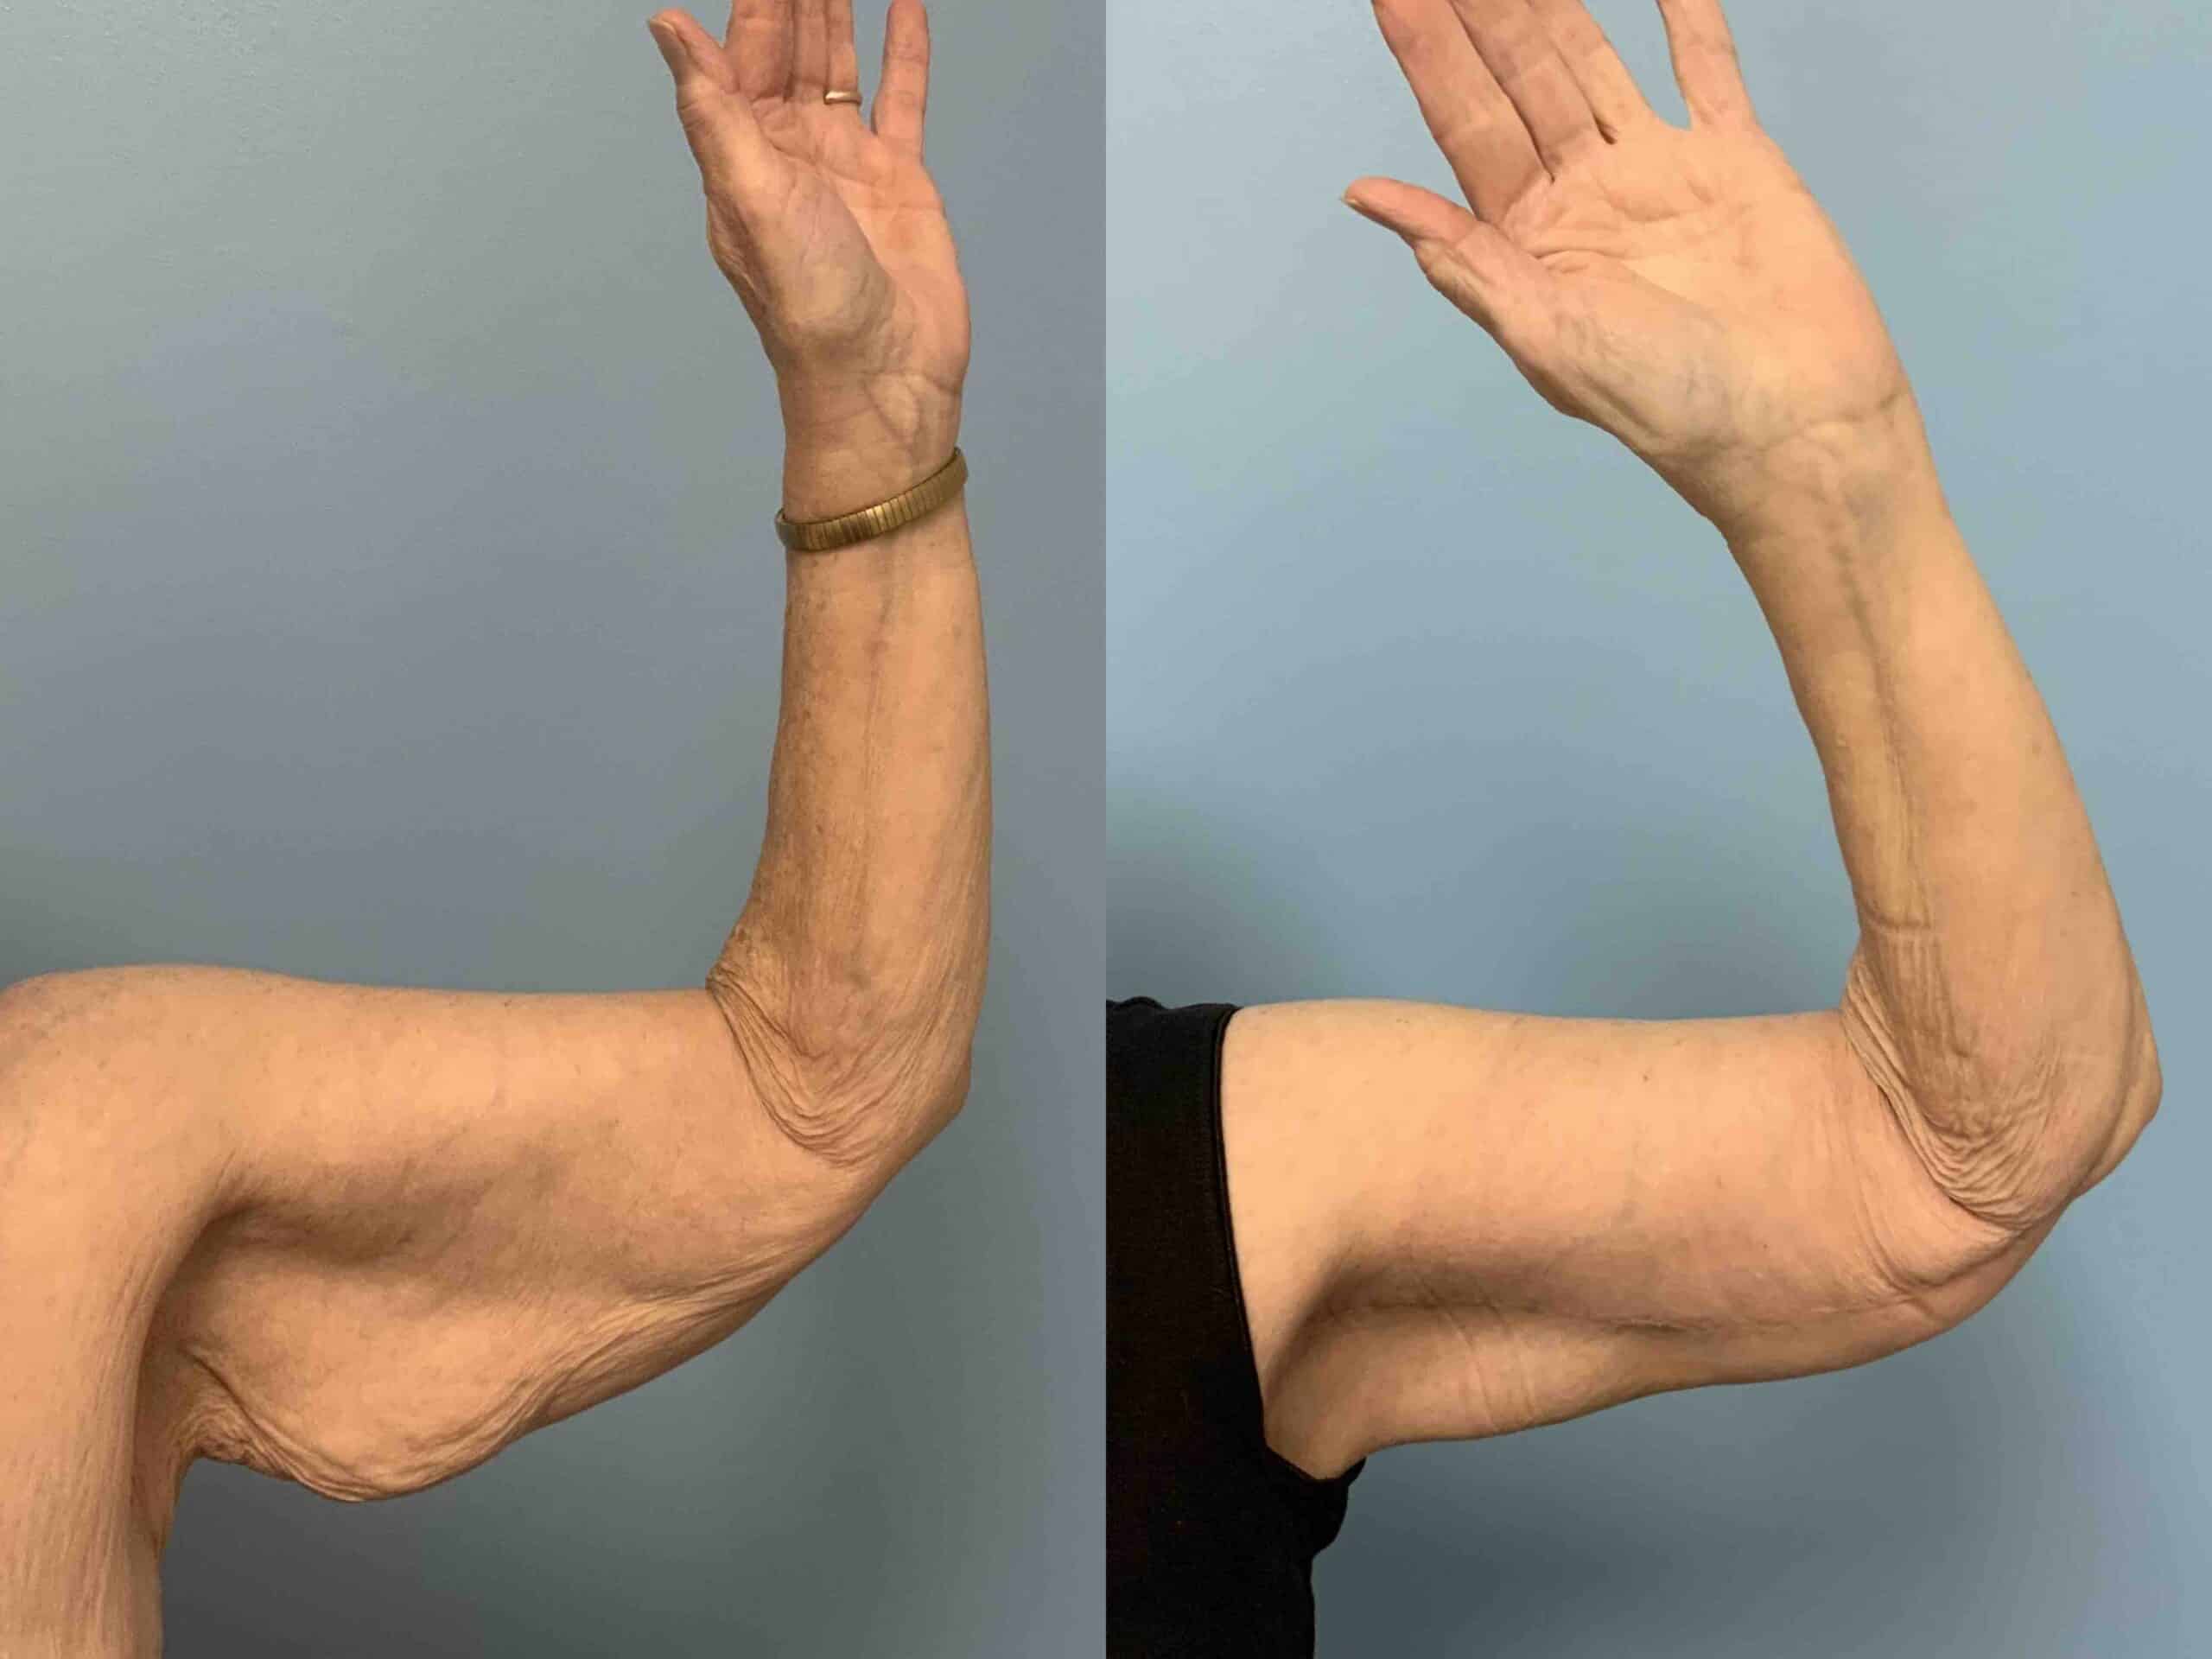 Before and after, patient 2 mo post op from Brachioplasty and VASER arms treatment performed by Dr. Paul Vanek